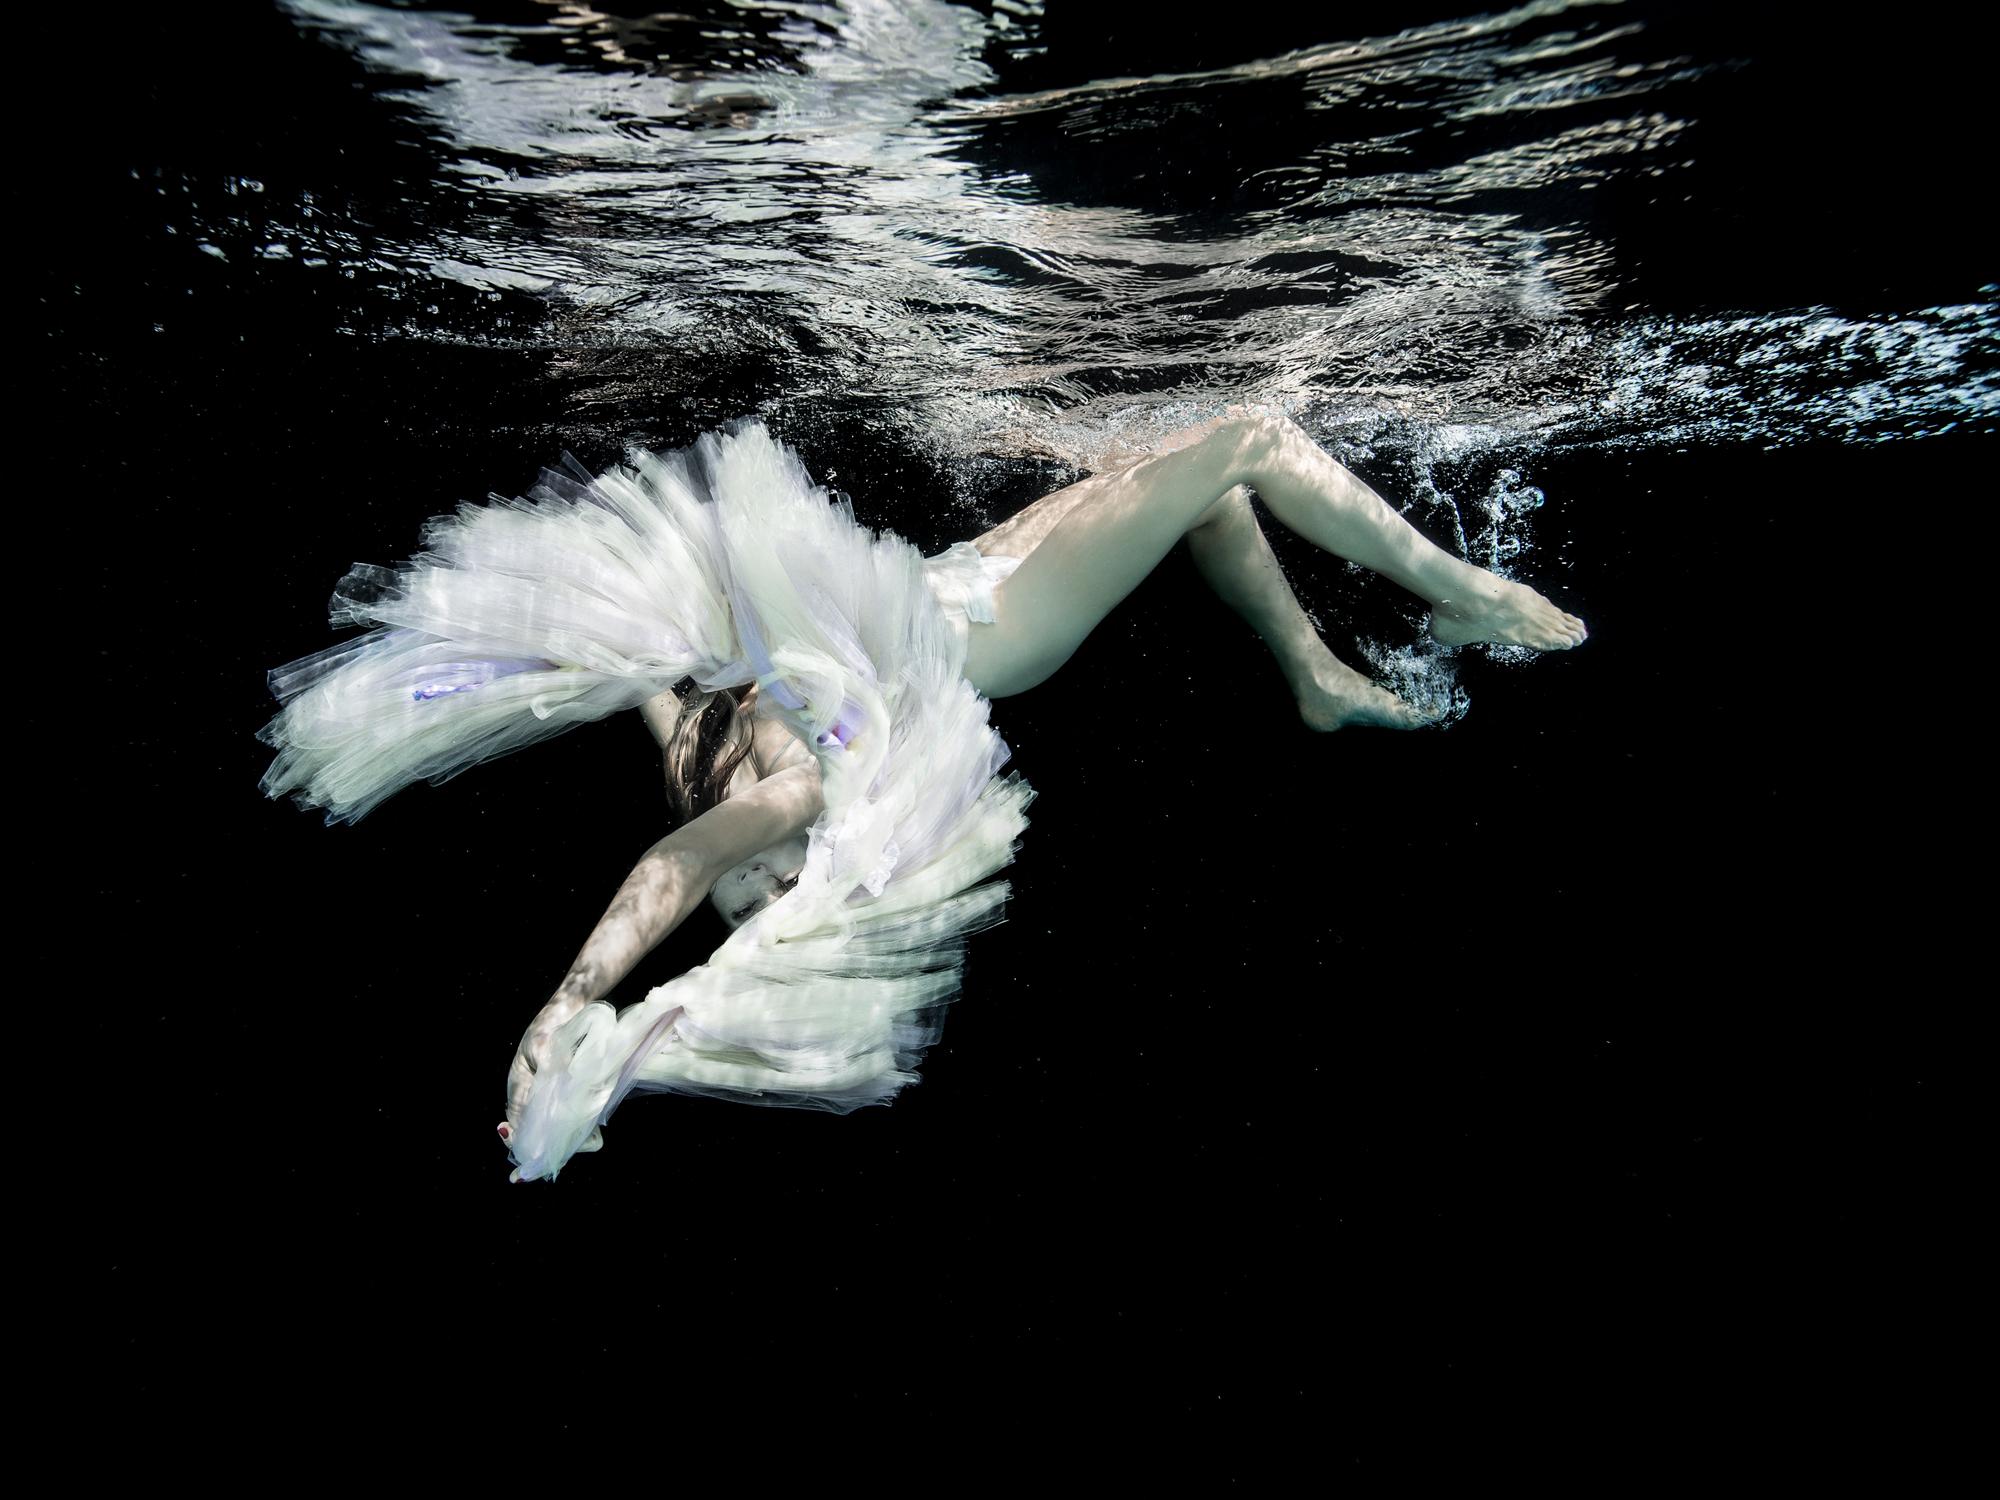 Ballet - underwater black and white nude photograph - archival pigment 36" x 48"